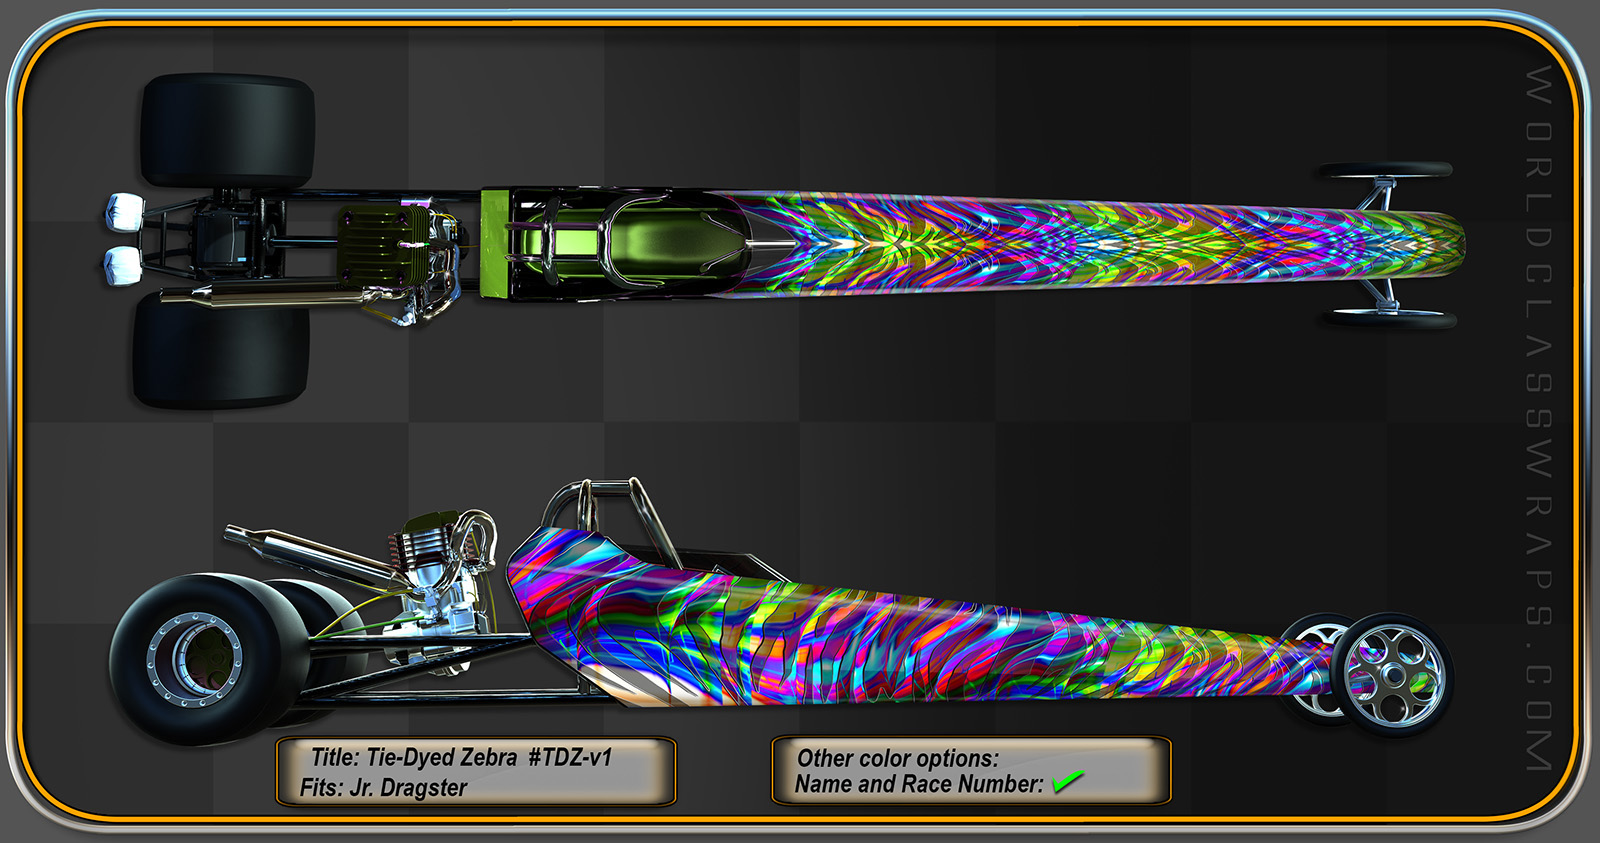 Combustion series,  junior dragster wrap